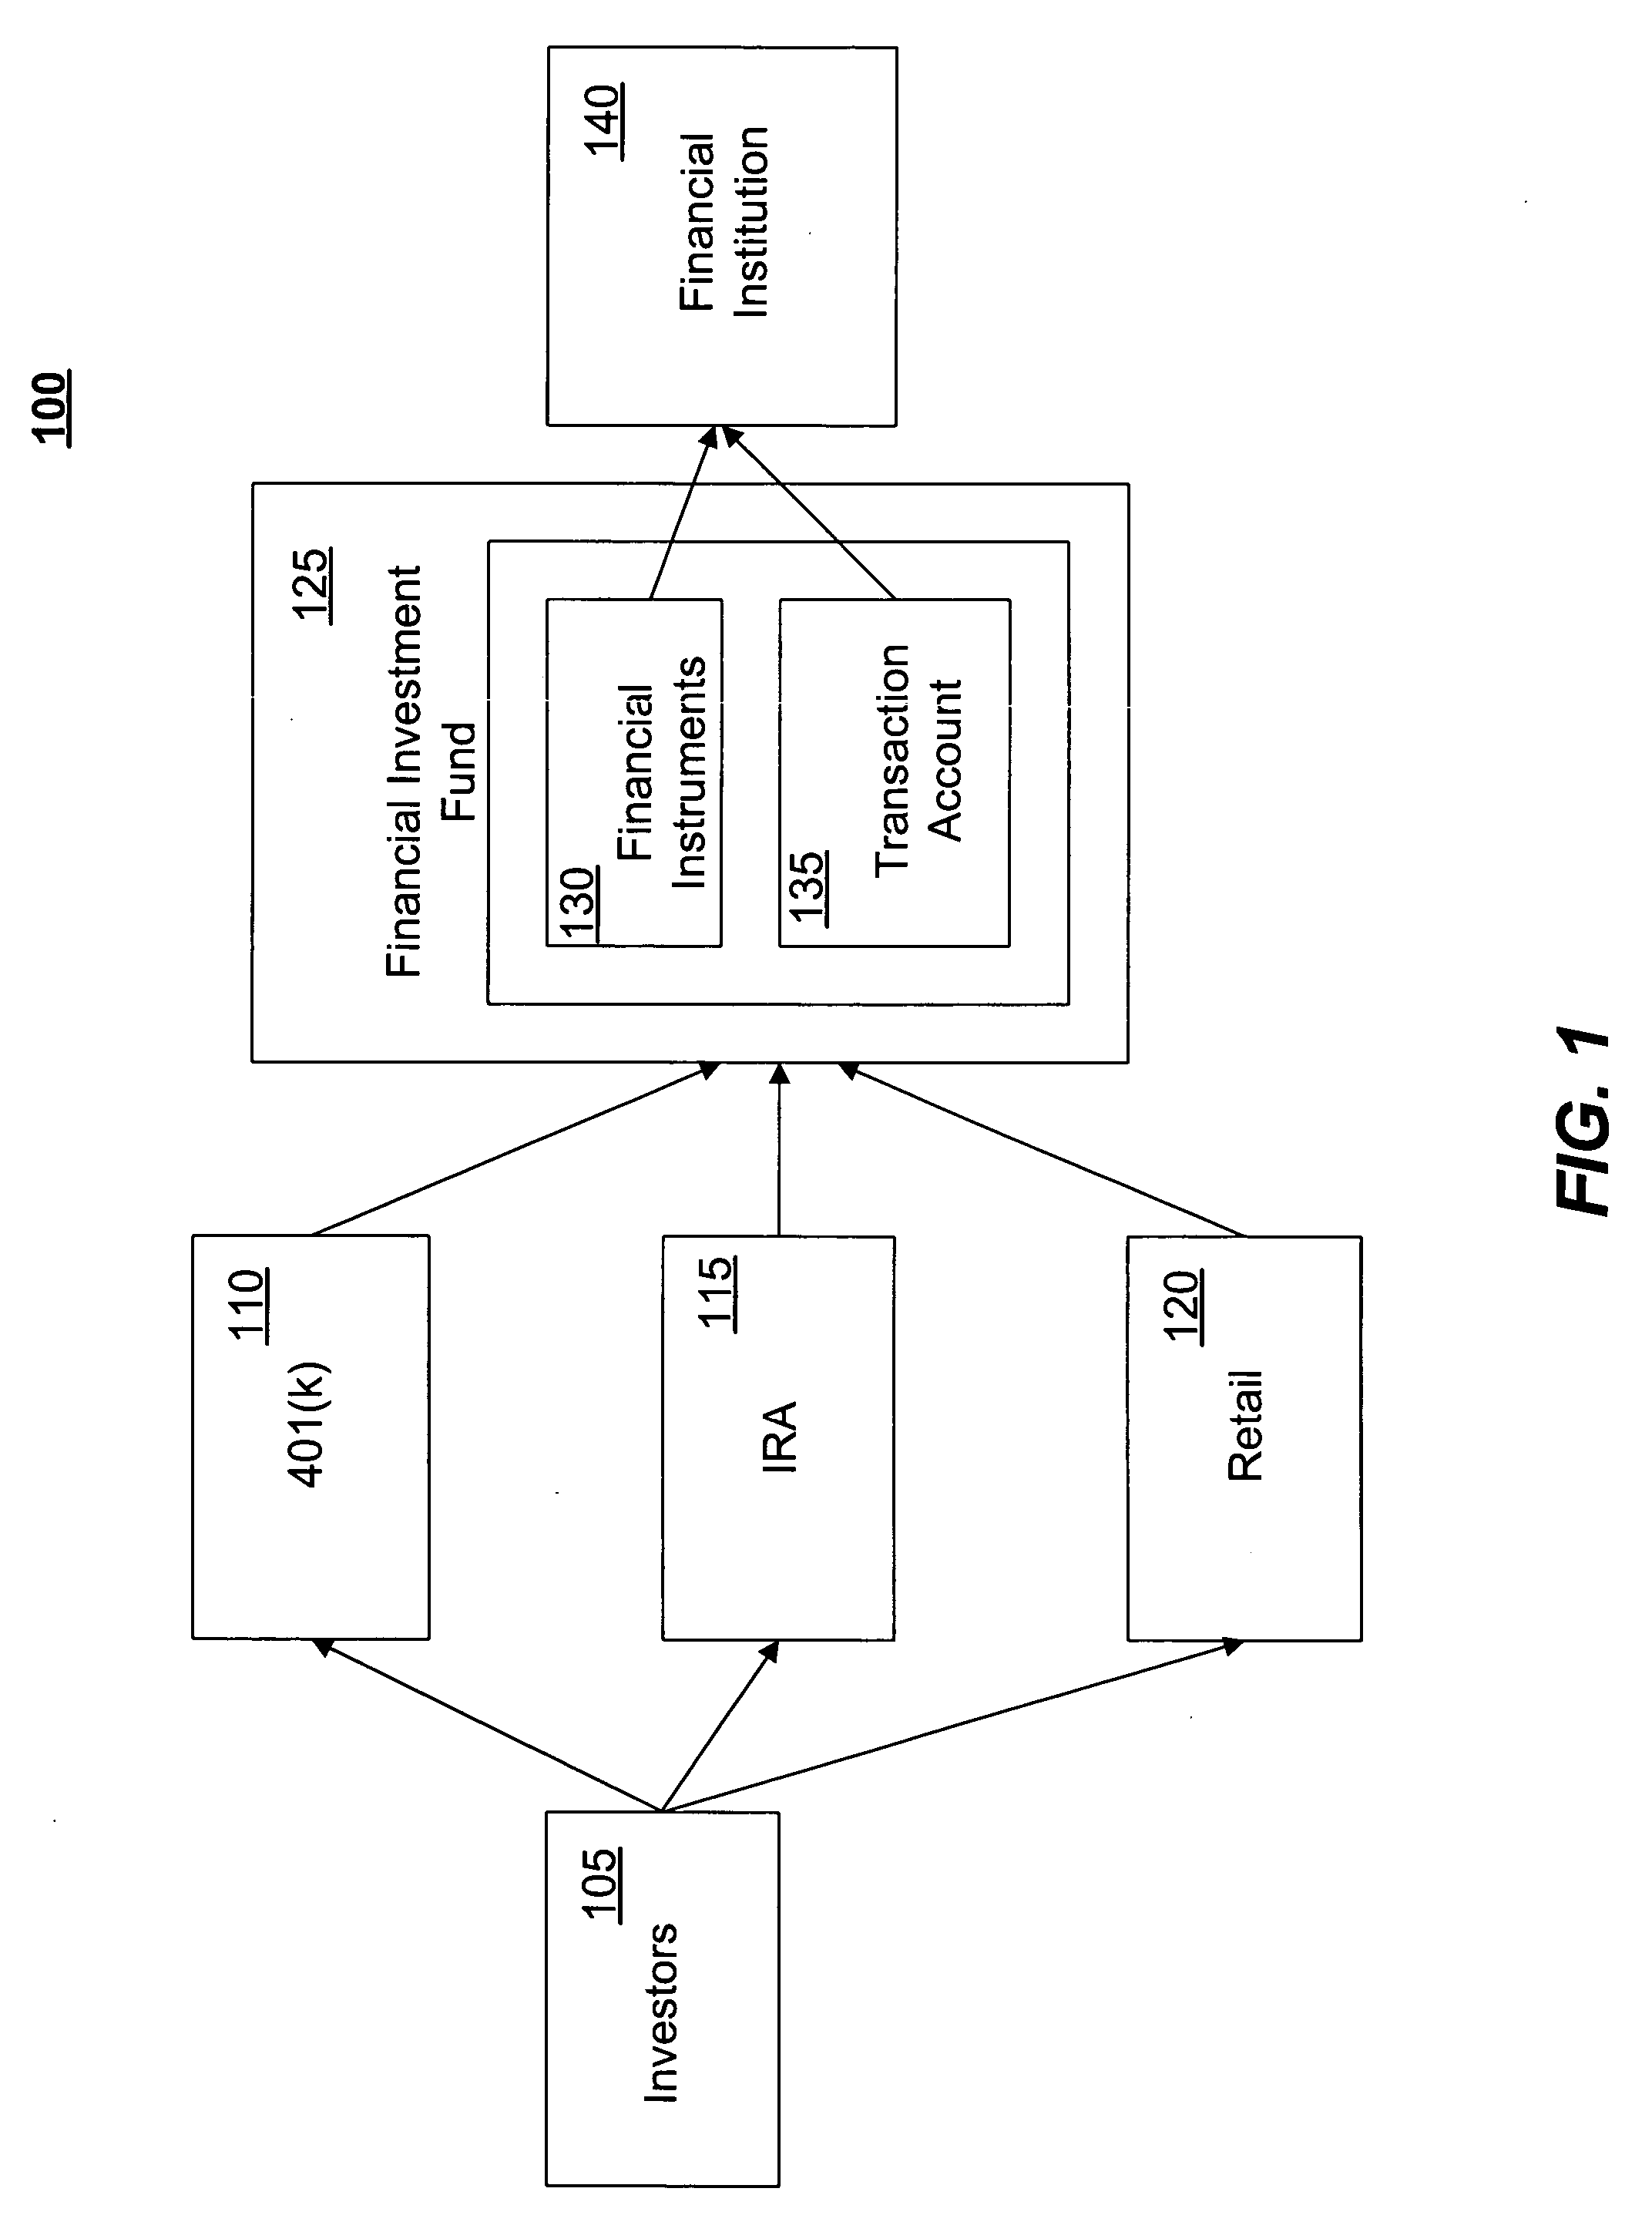 Systems and methods for managing a financial investment fund